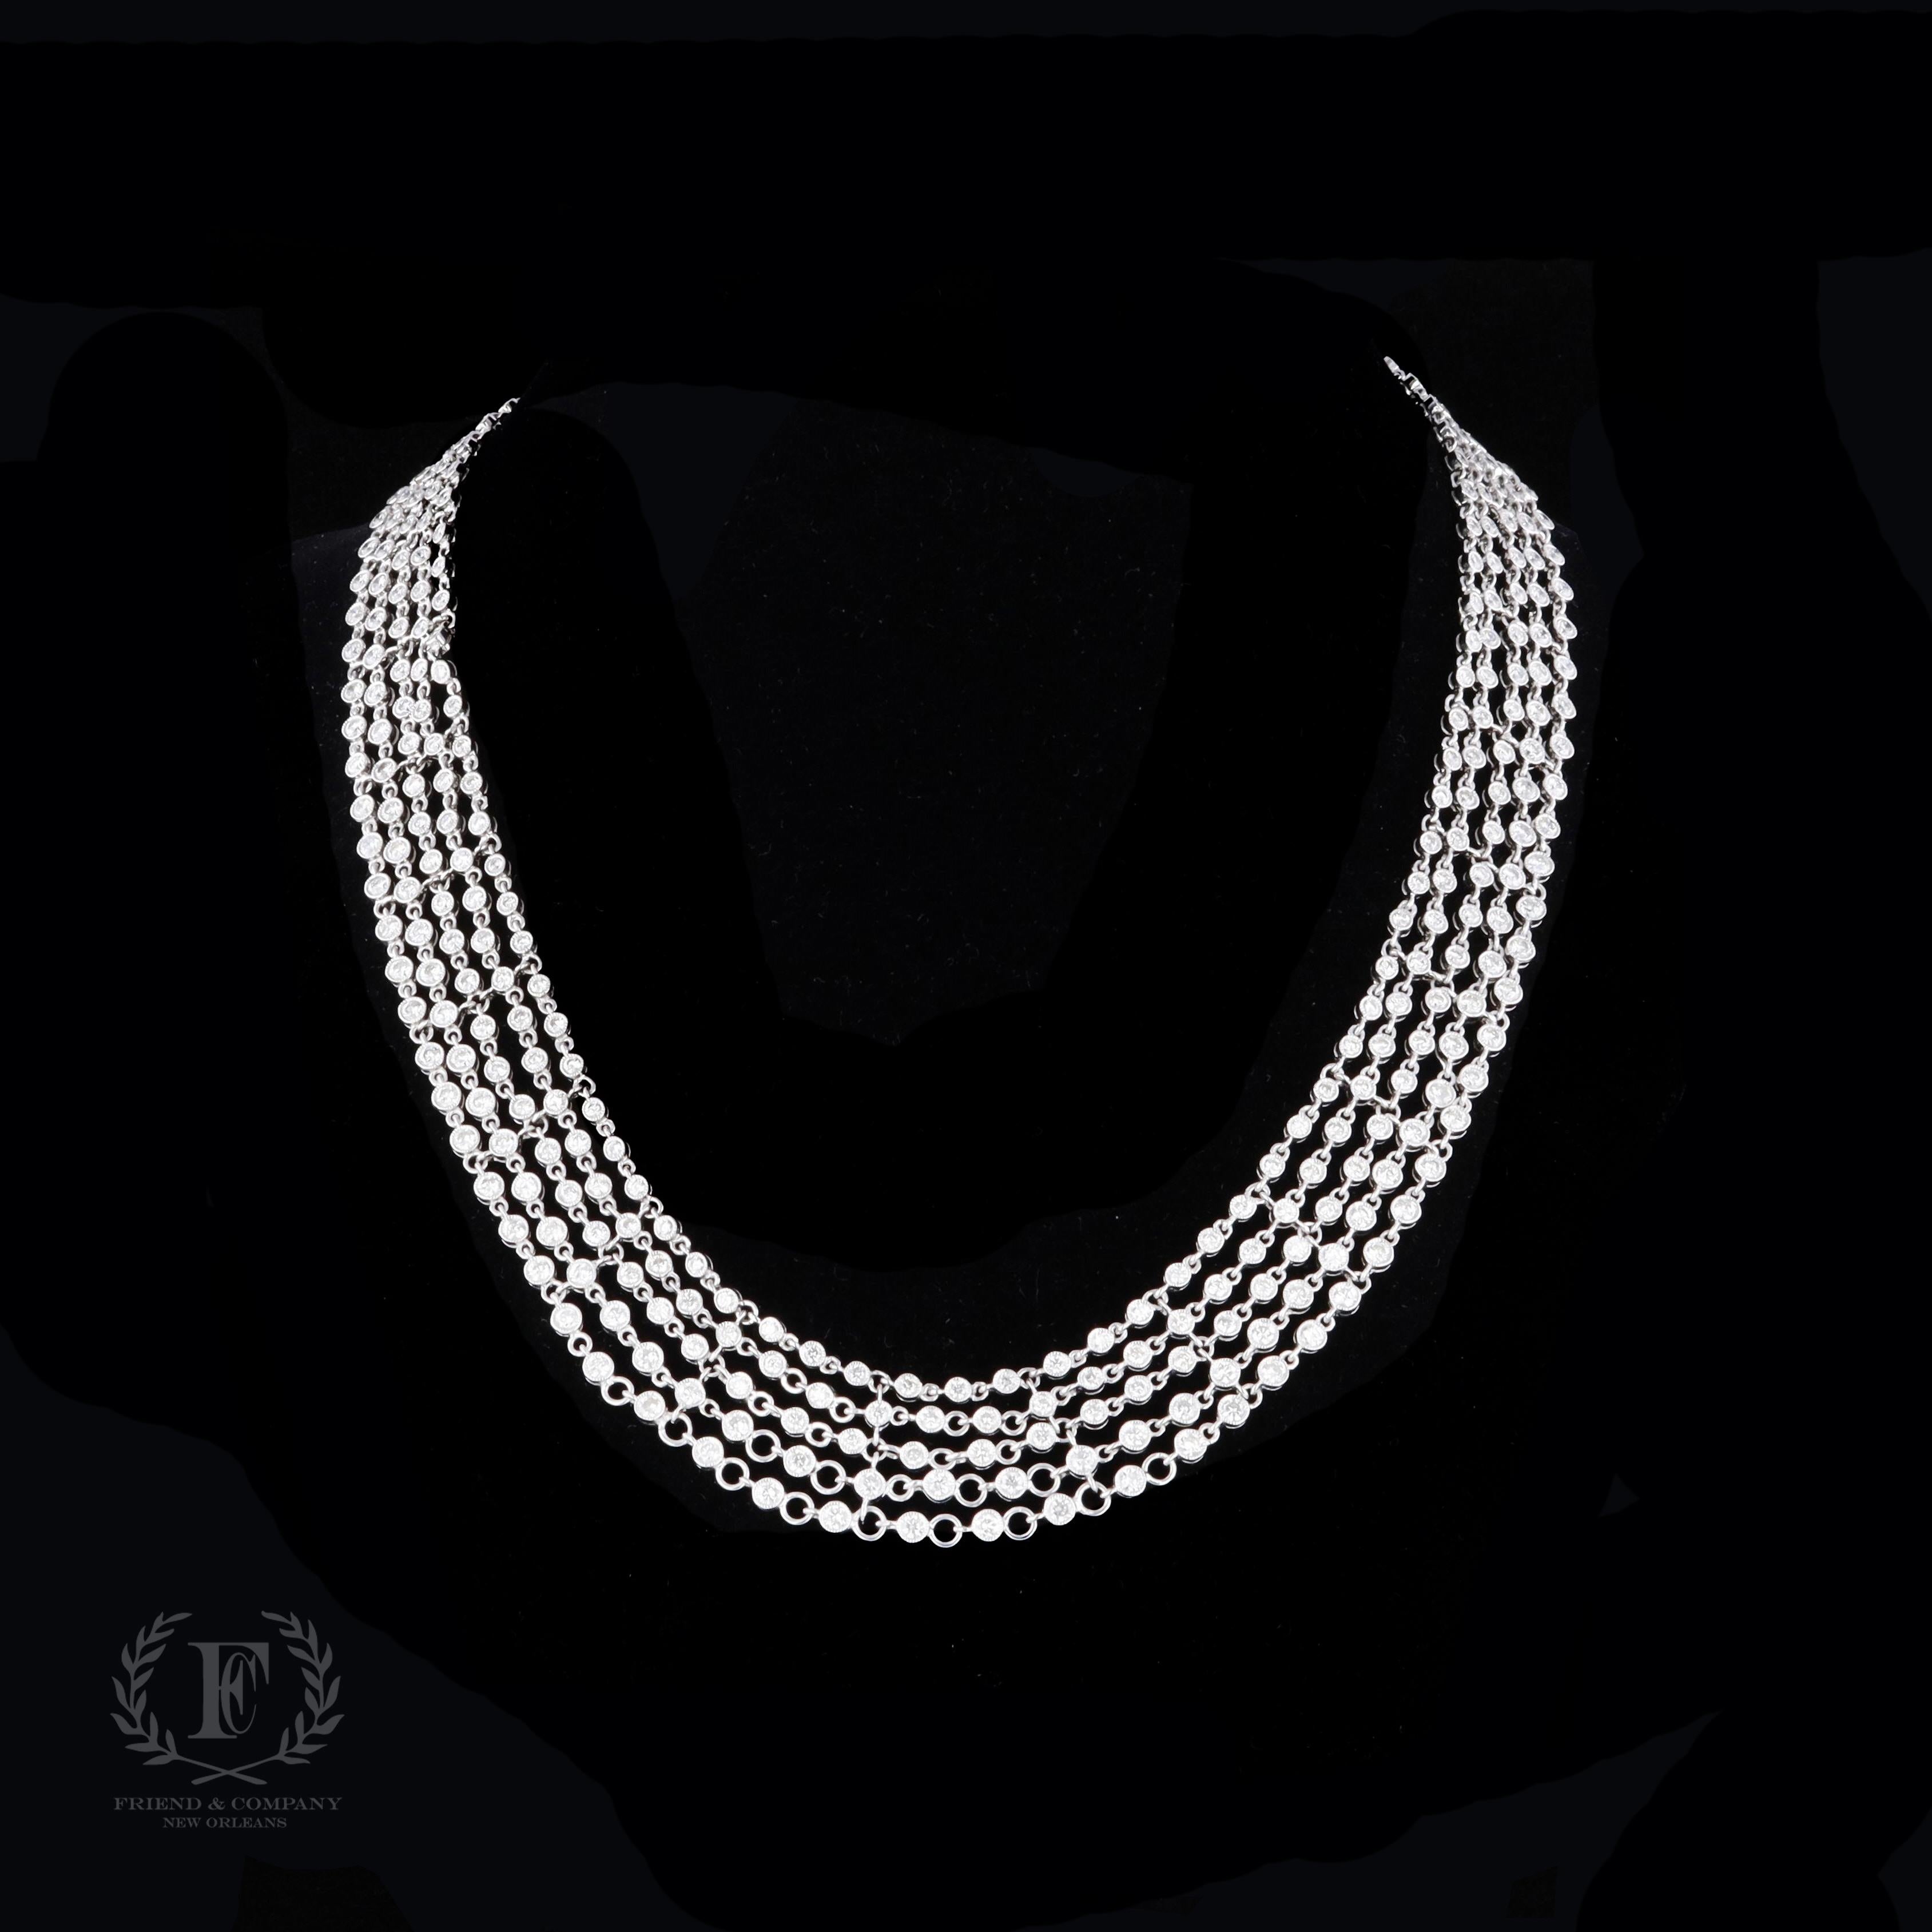 This necklace is the epitome of elegance and glamour. This beautiful 18 karat white gold multi-strand diamond necklace features 420 round diamonds with a total weight of 15.10 carats. The necklace measures 16 inches length.